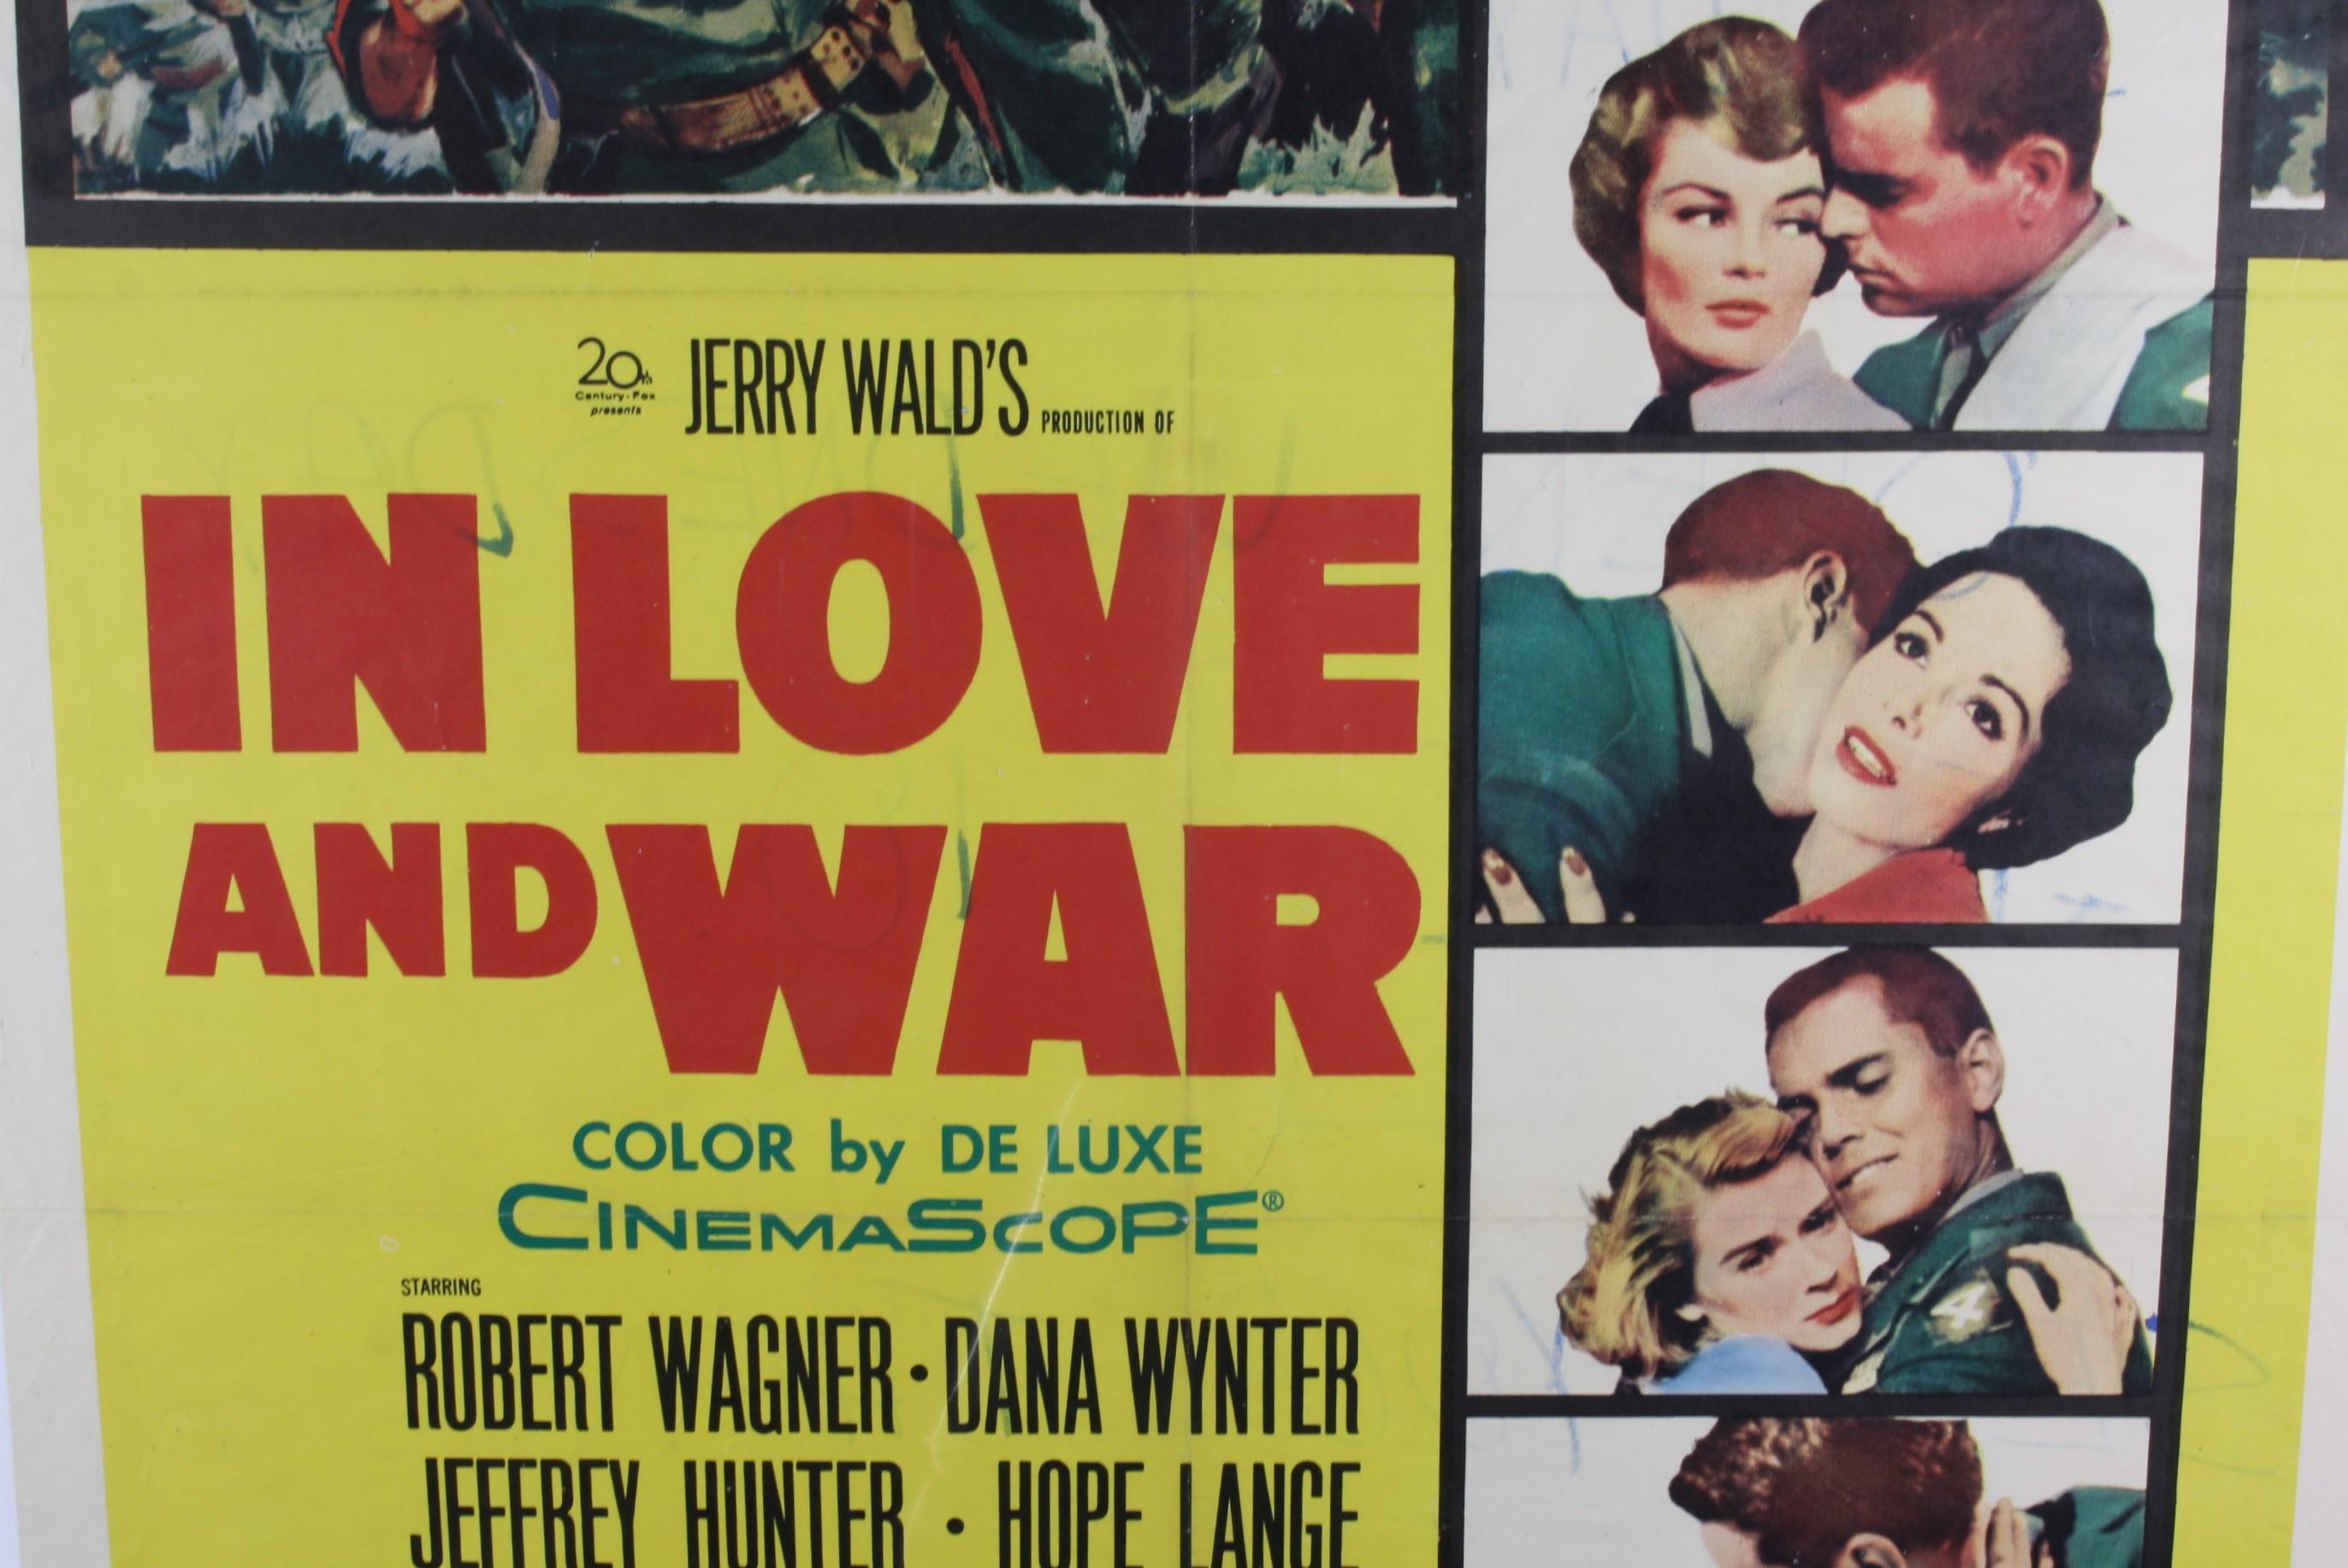 1958 war movie one sheet poster for “In Love and War”